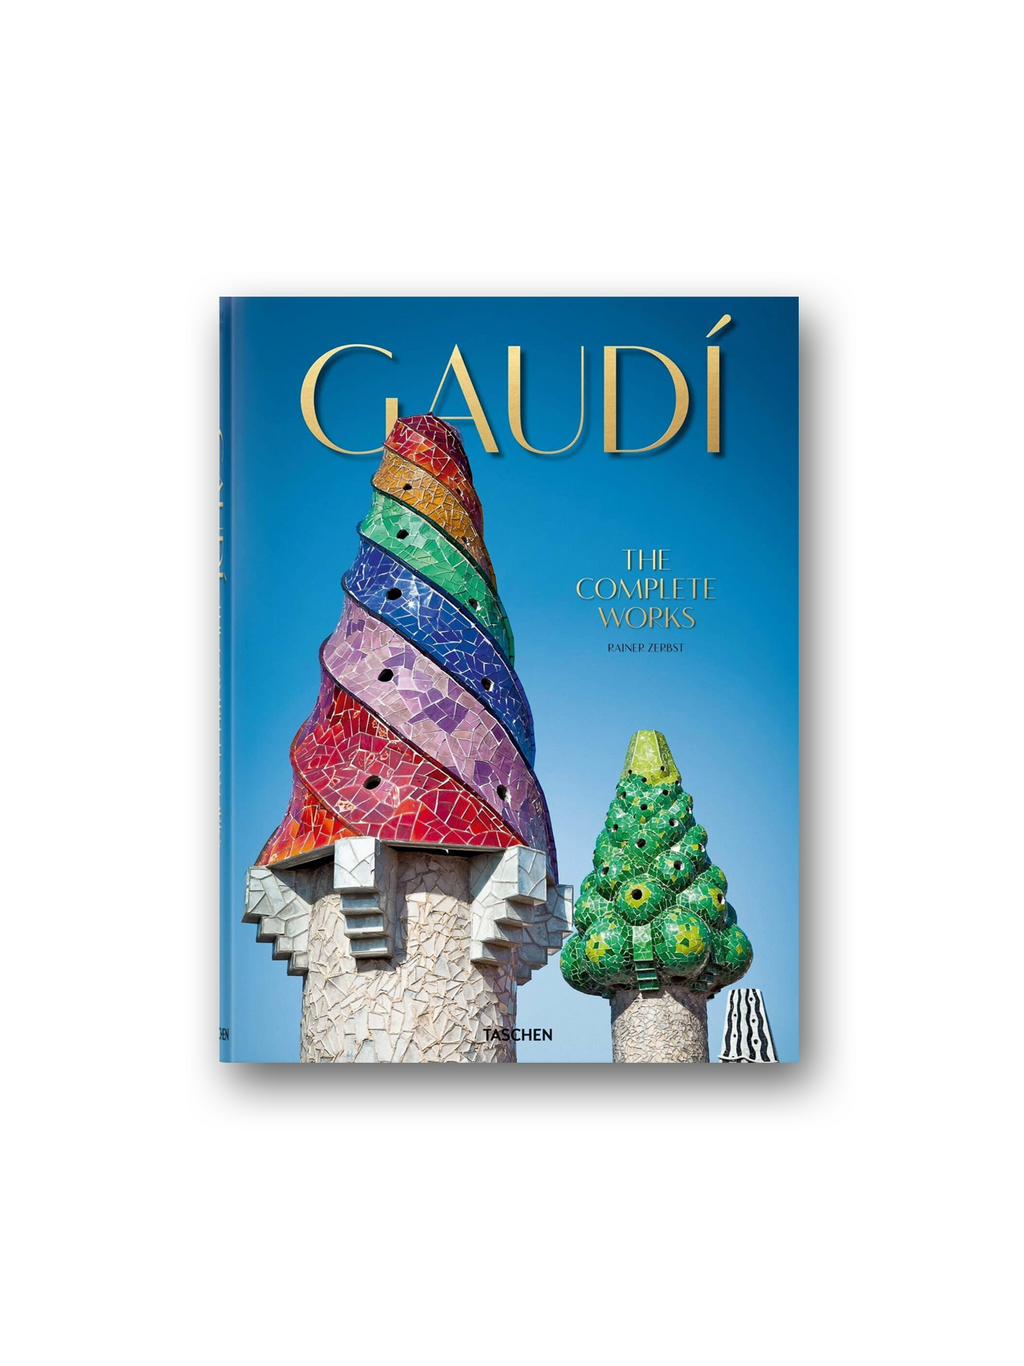 Gaudi: The Complete Works